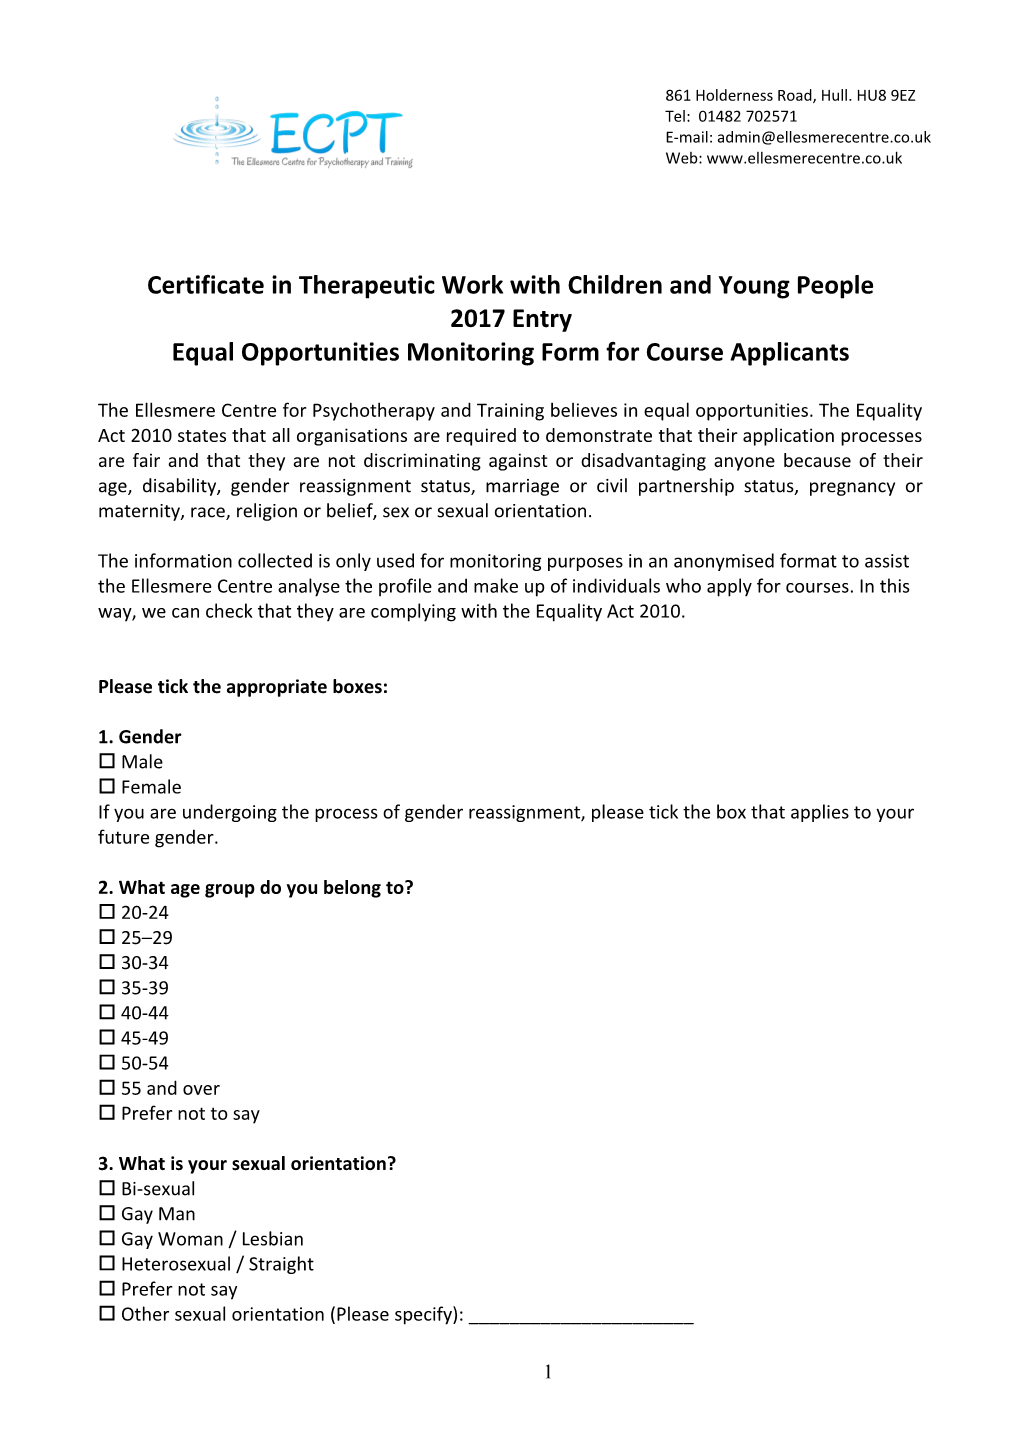 Certificate in Therapeutic Work with Children and Young People